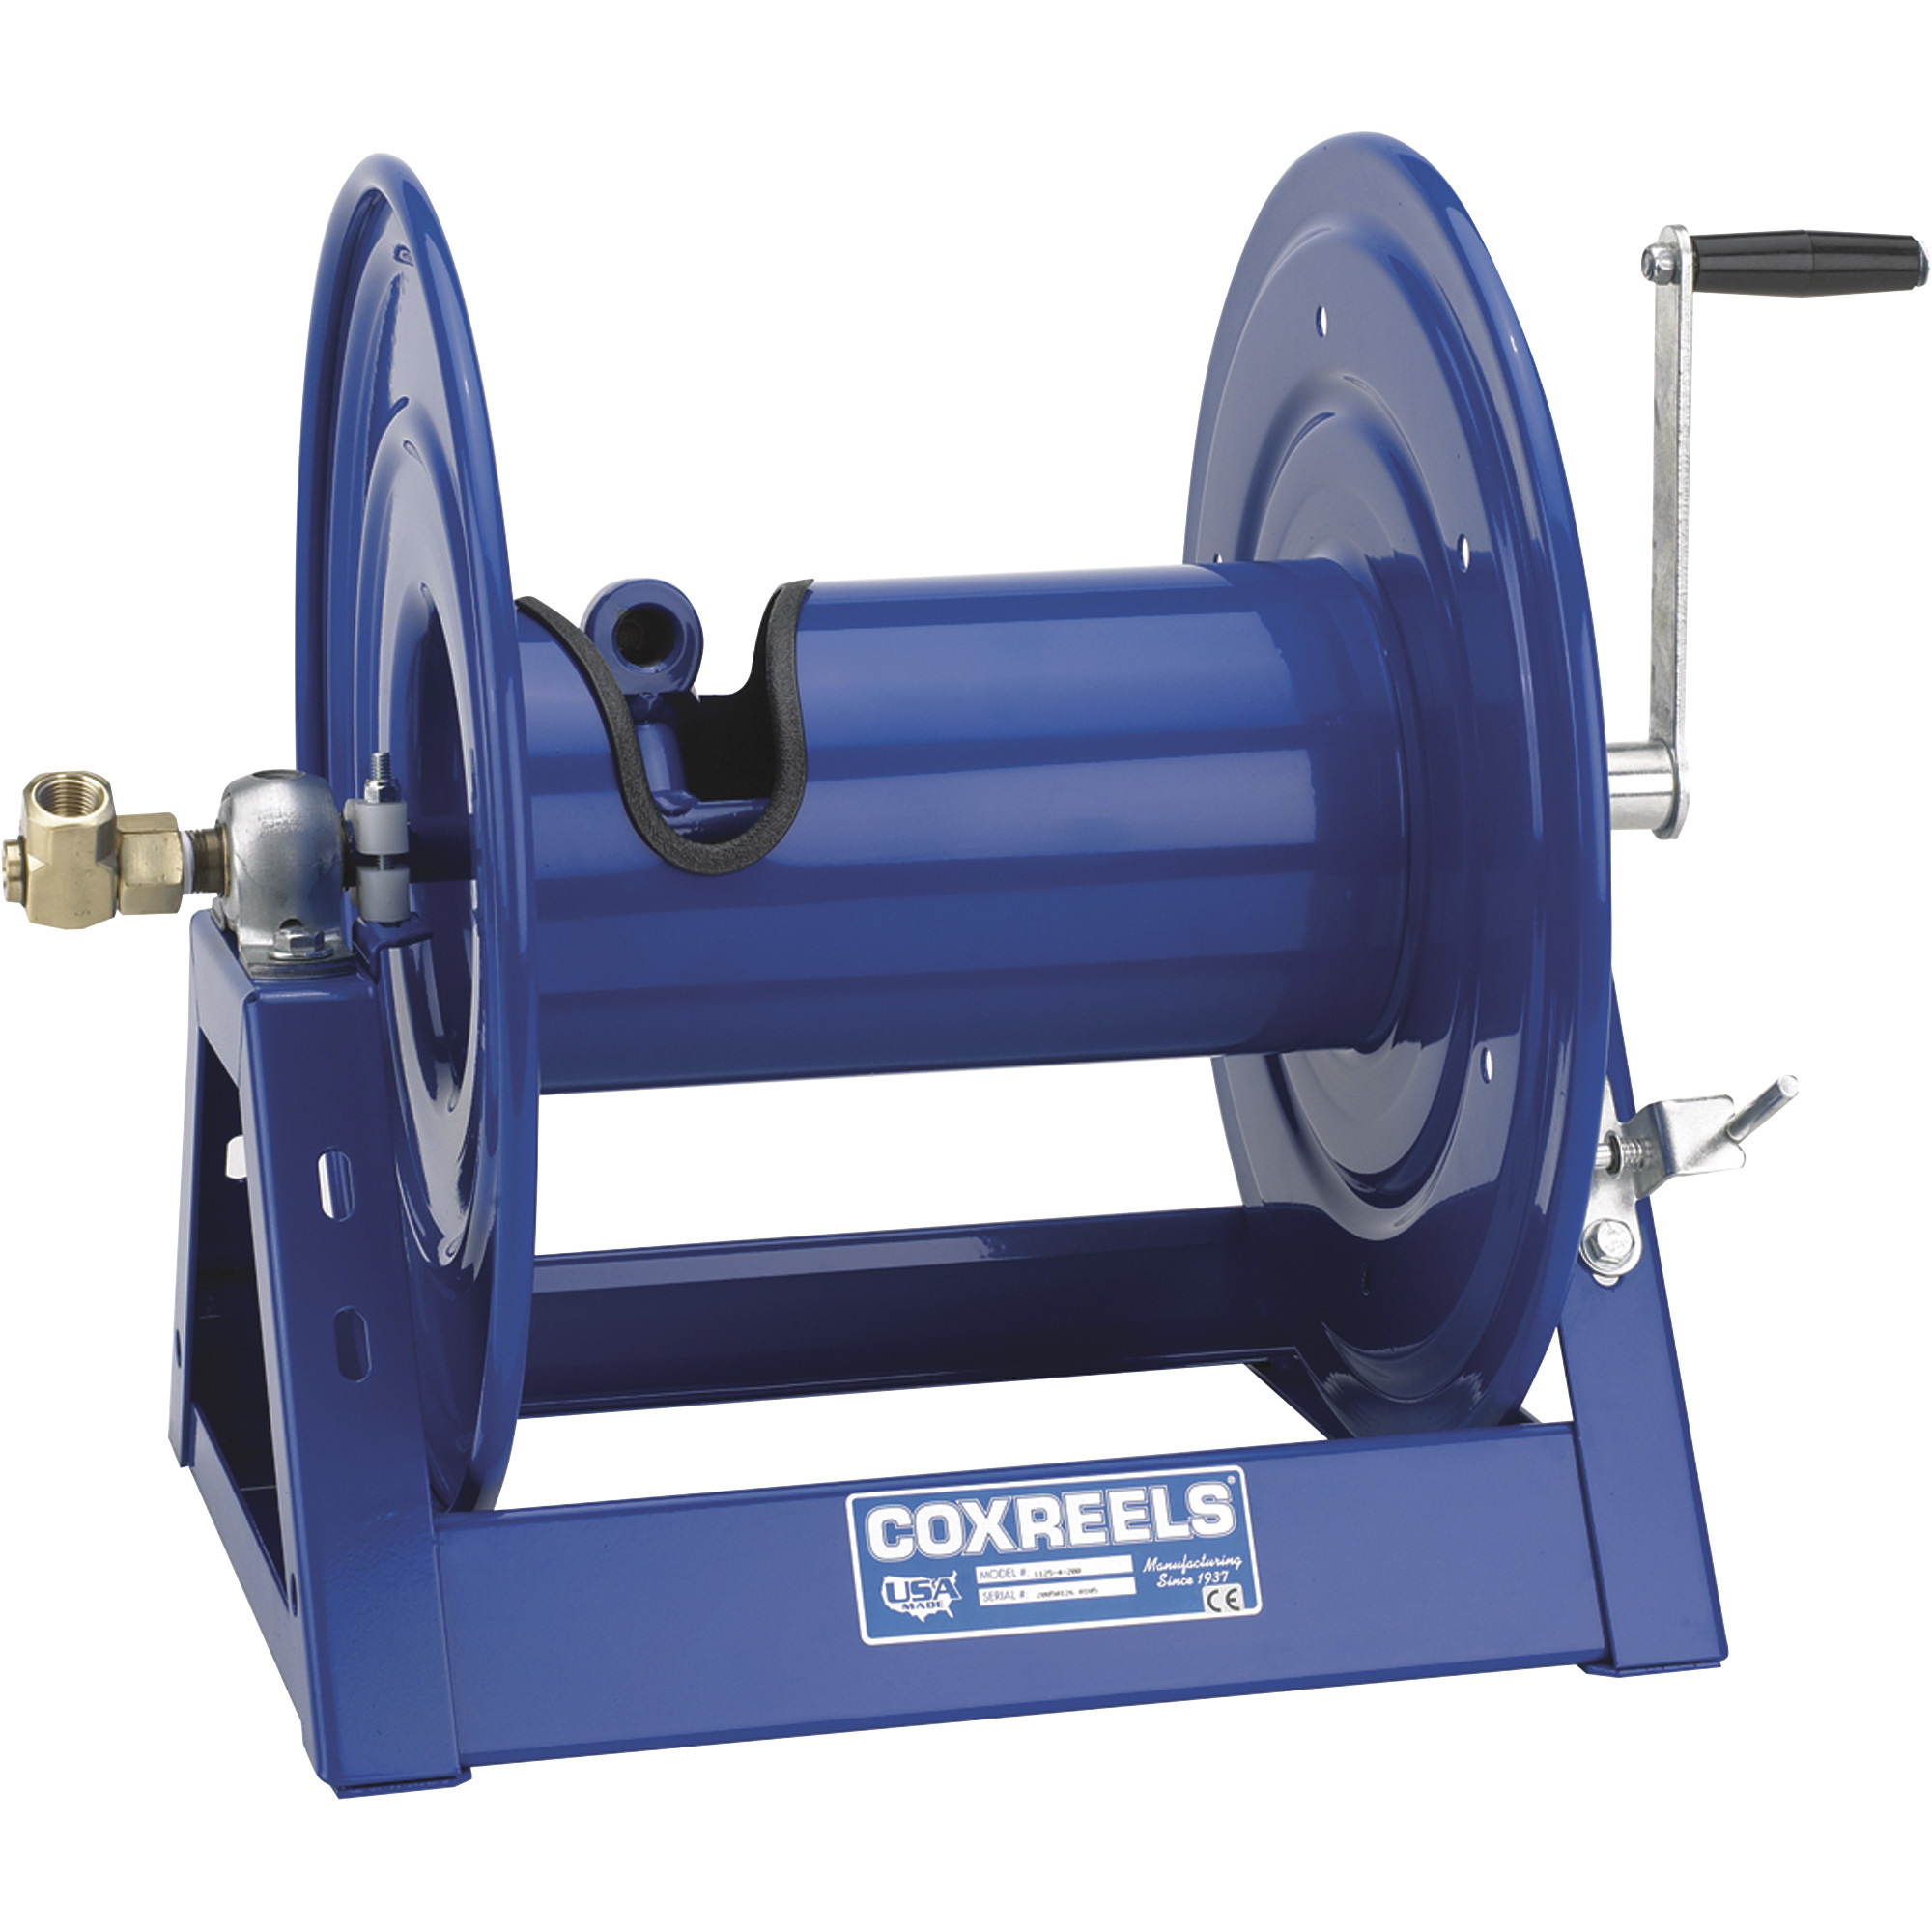 Coxreels Hand-Crank Hose Reel - Holds 3/8in. x 300ft. Hose, Max. 3000 PSI,  Model# 1125-4-200-BEXX